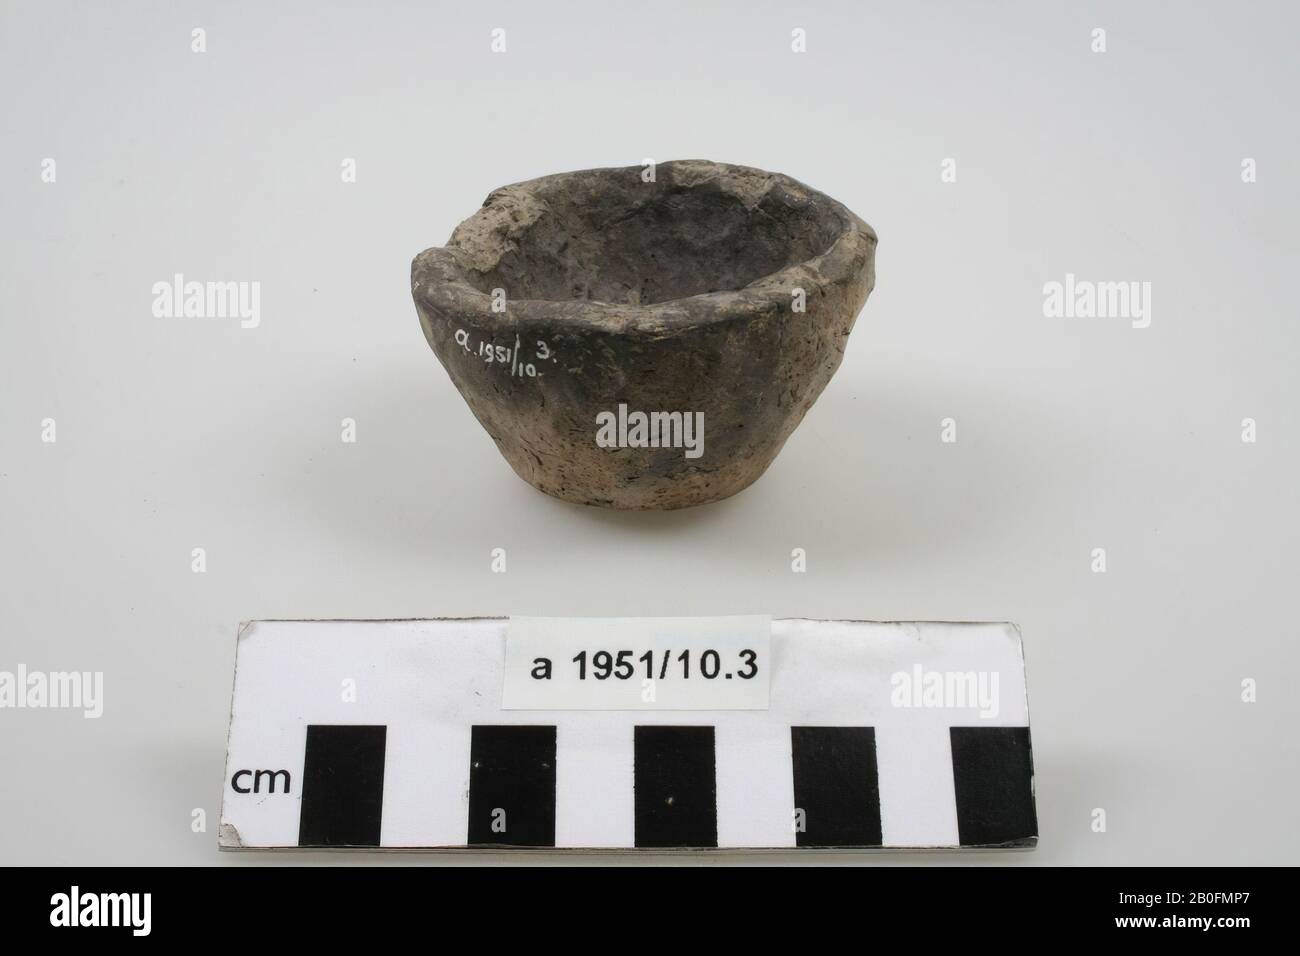 Inverted-frustoconical cup of dark and light gray mottled, hand-formed earthenware. Piece of the rim is missing., Cup, earthenware (hand molded), h: 4,4 cm, diam: 7,5 cm, roman, Netherlands, Friesland, Ferwerderadiel, Janum Stock Photo